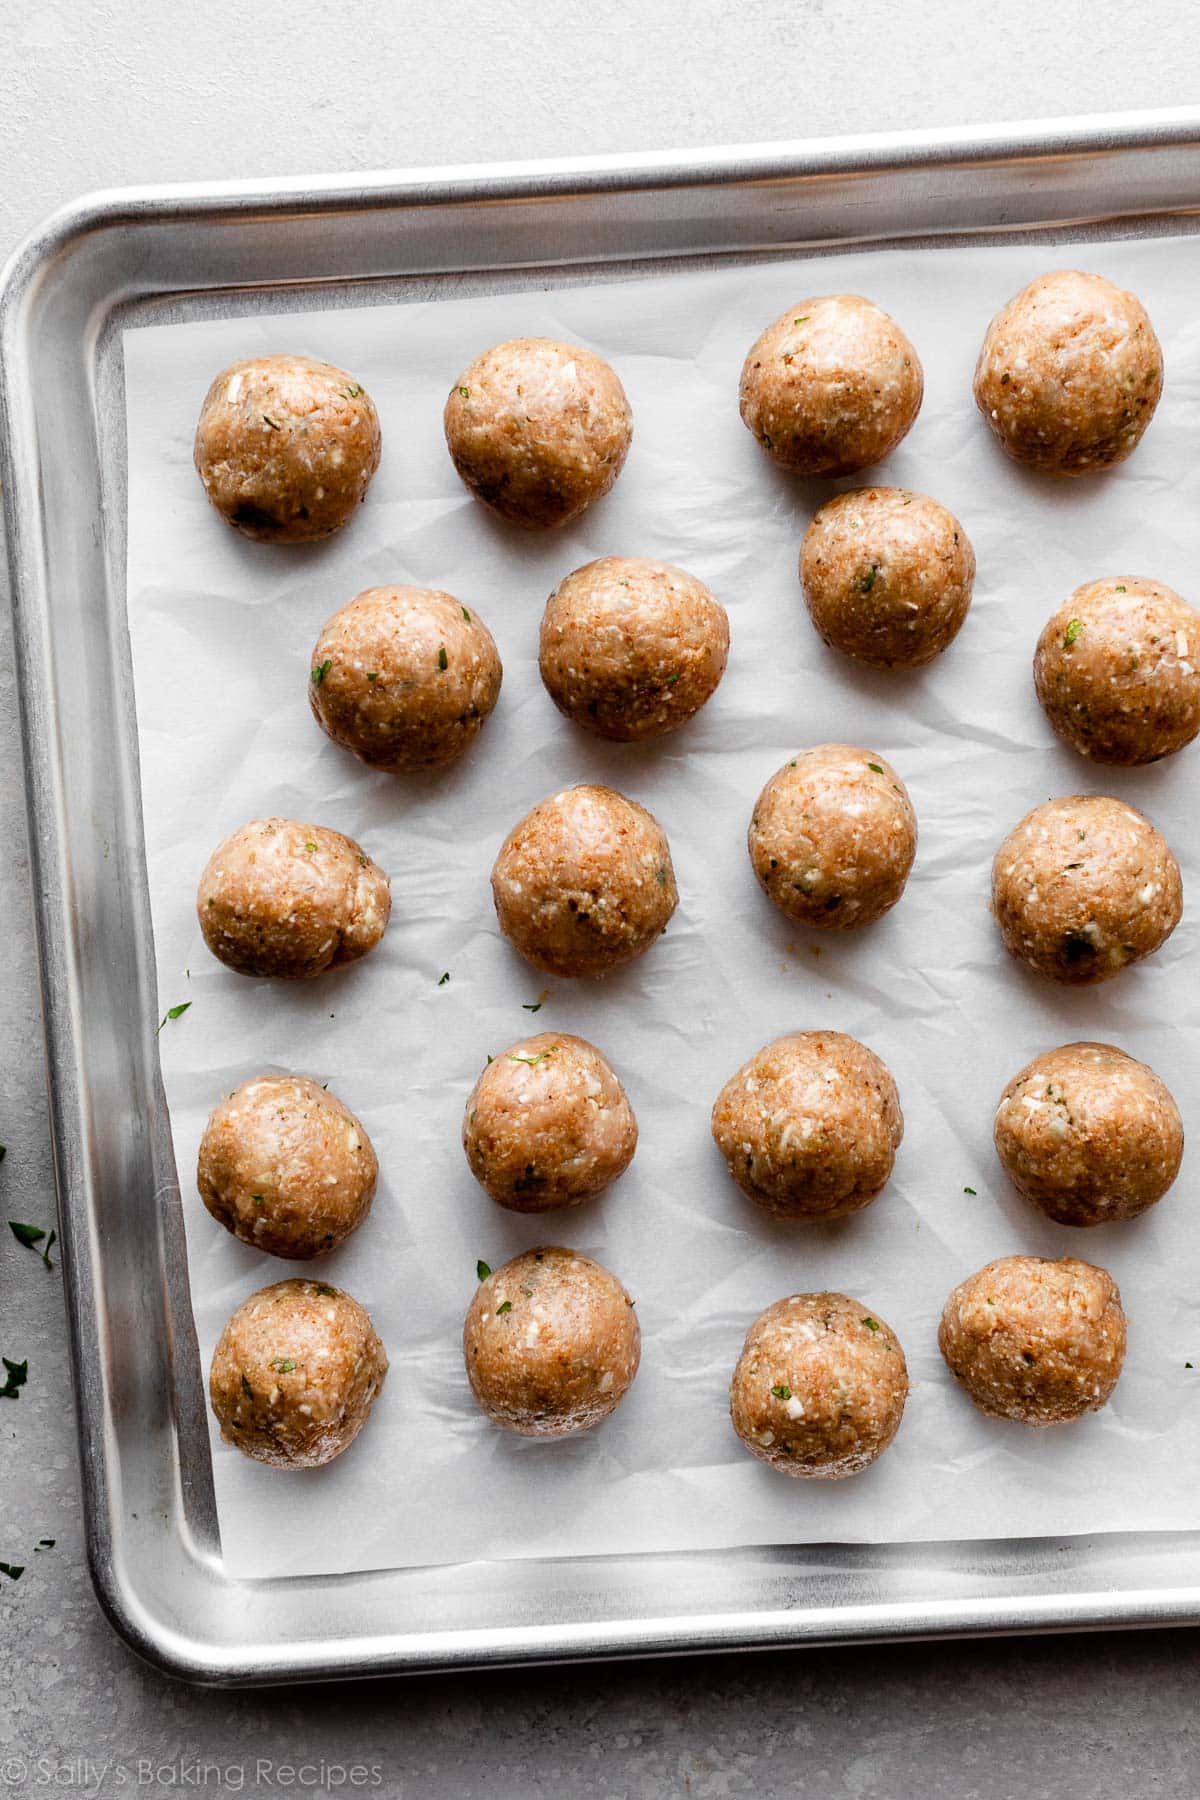 unbaked meatballs on parchment paper-lined baking sheet.